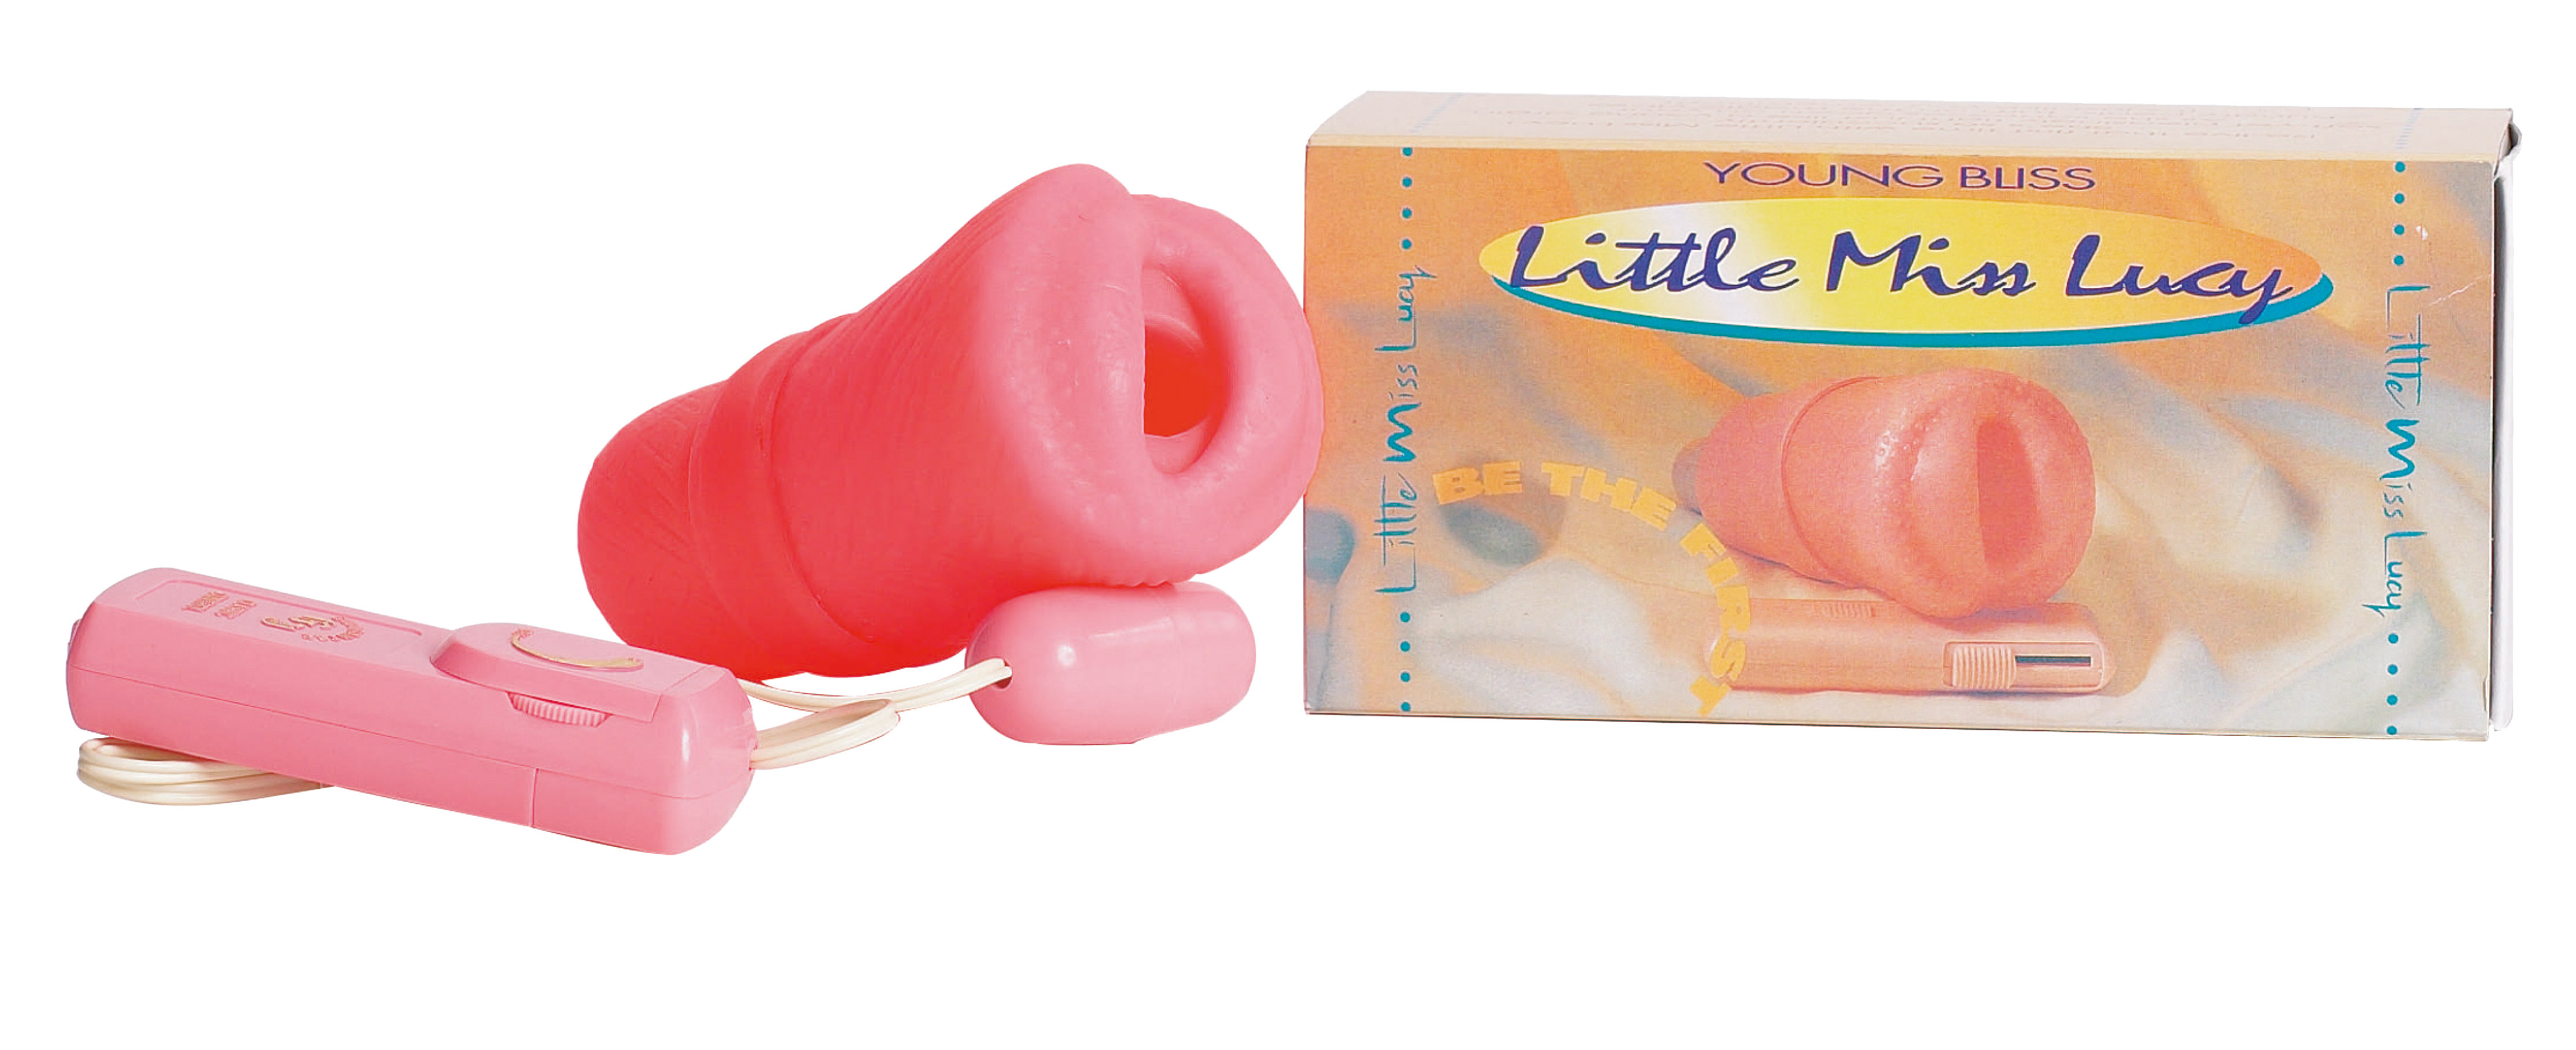 Vagina Little Miss Lucy